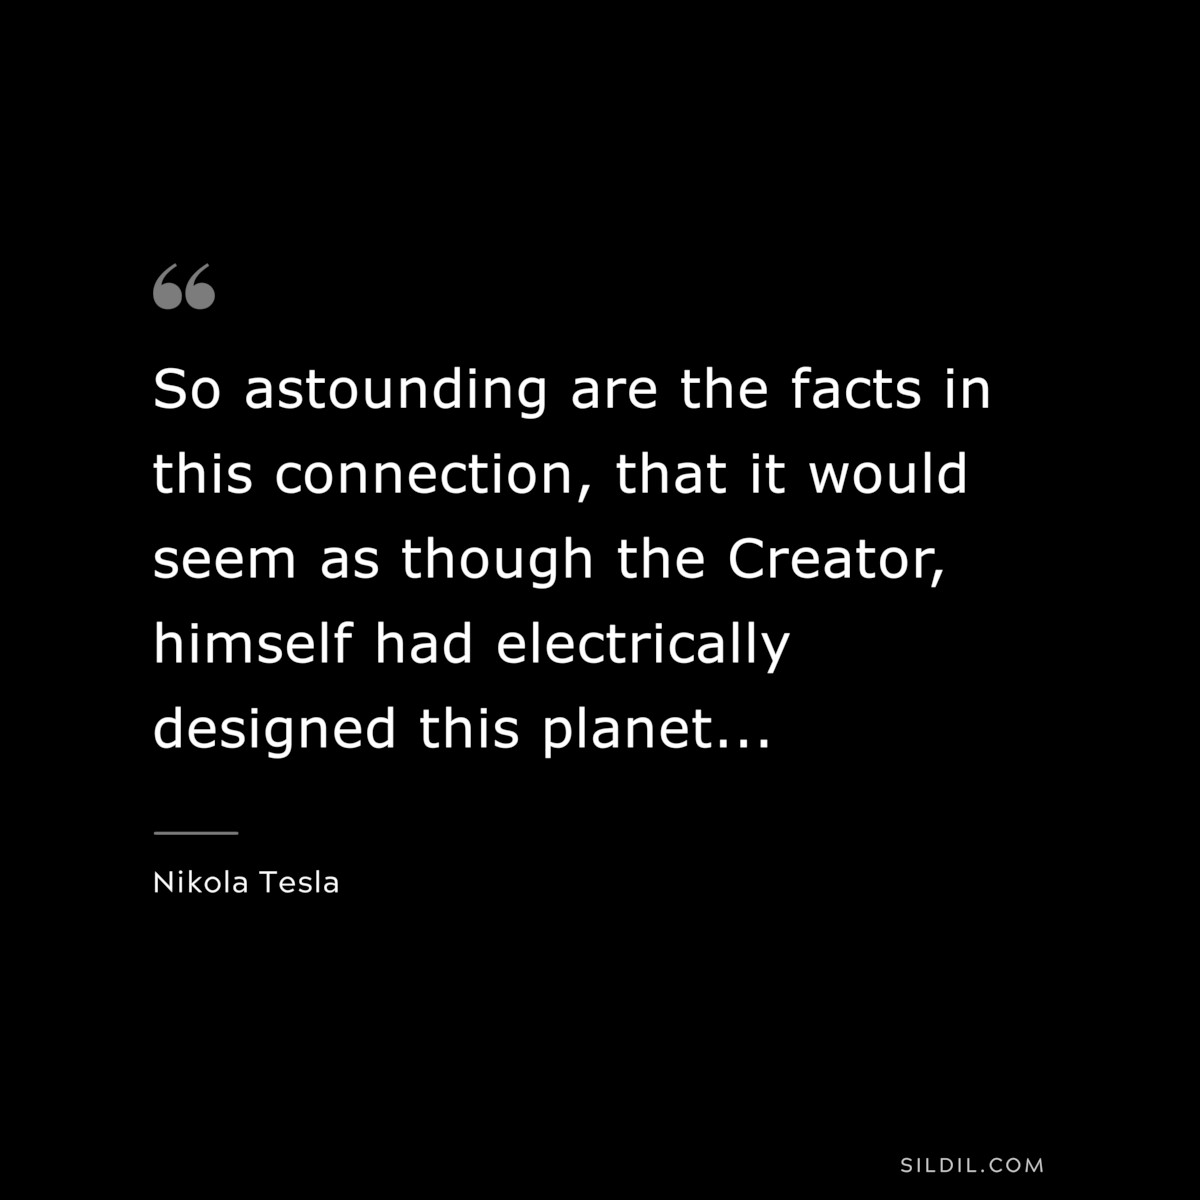 So astounding are the facts in this connection, that it would seem as though the Creator, himself had electrically designed this planet... ― Nikola Tesla